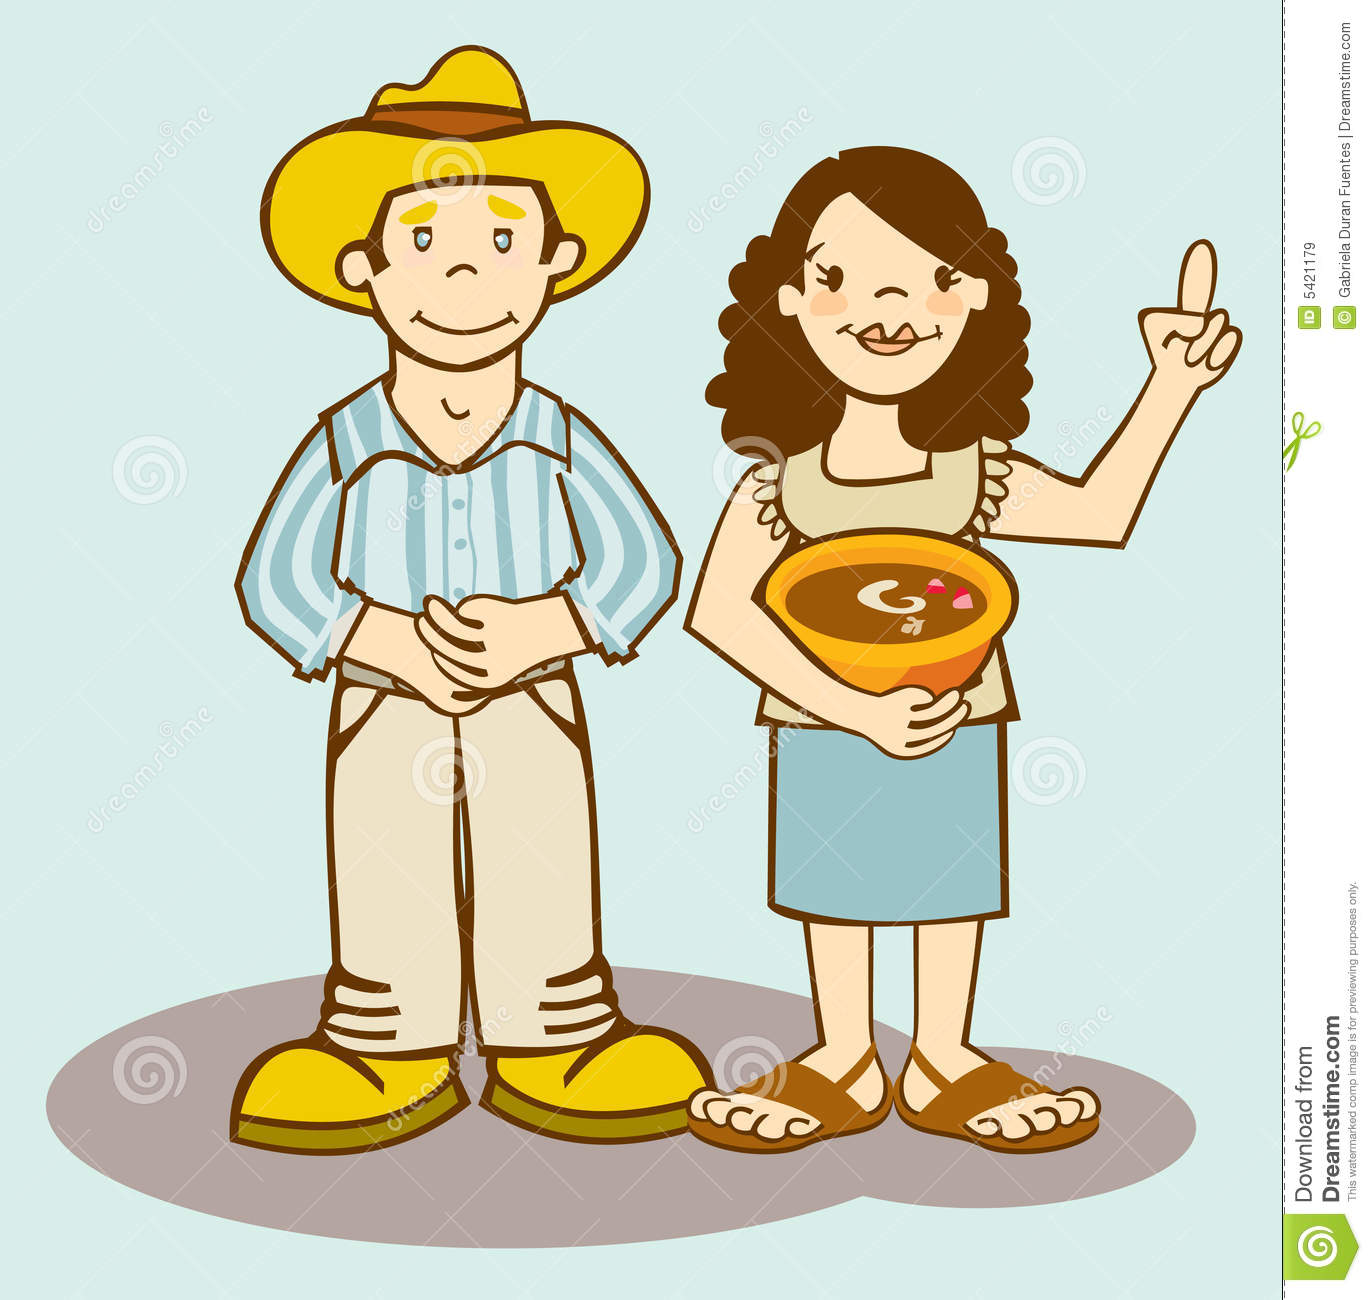 Farmer And Wife Royalty Free Stock Images   Image  5421179